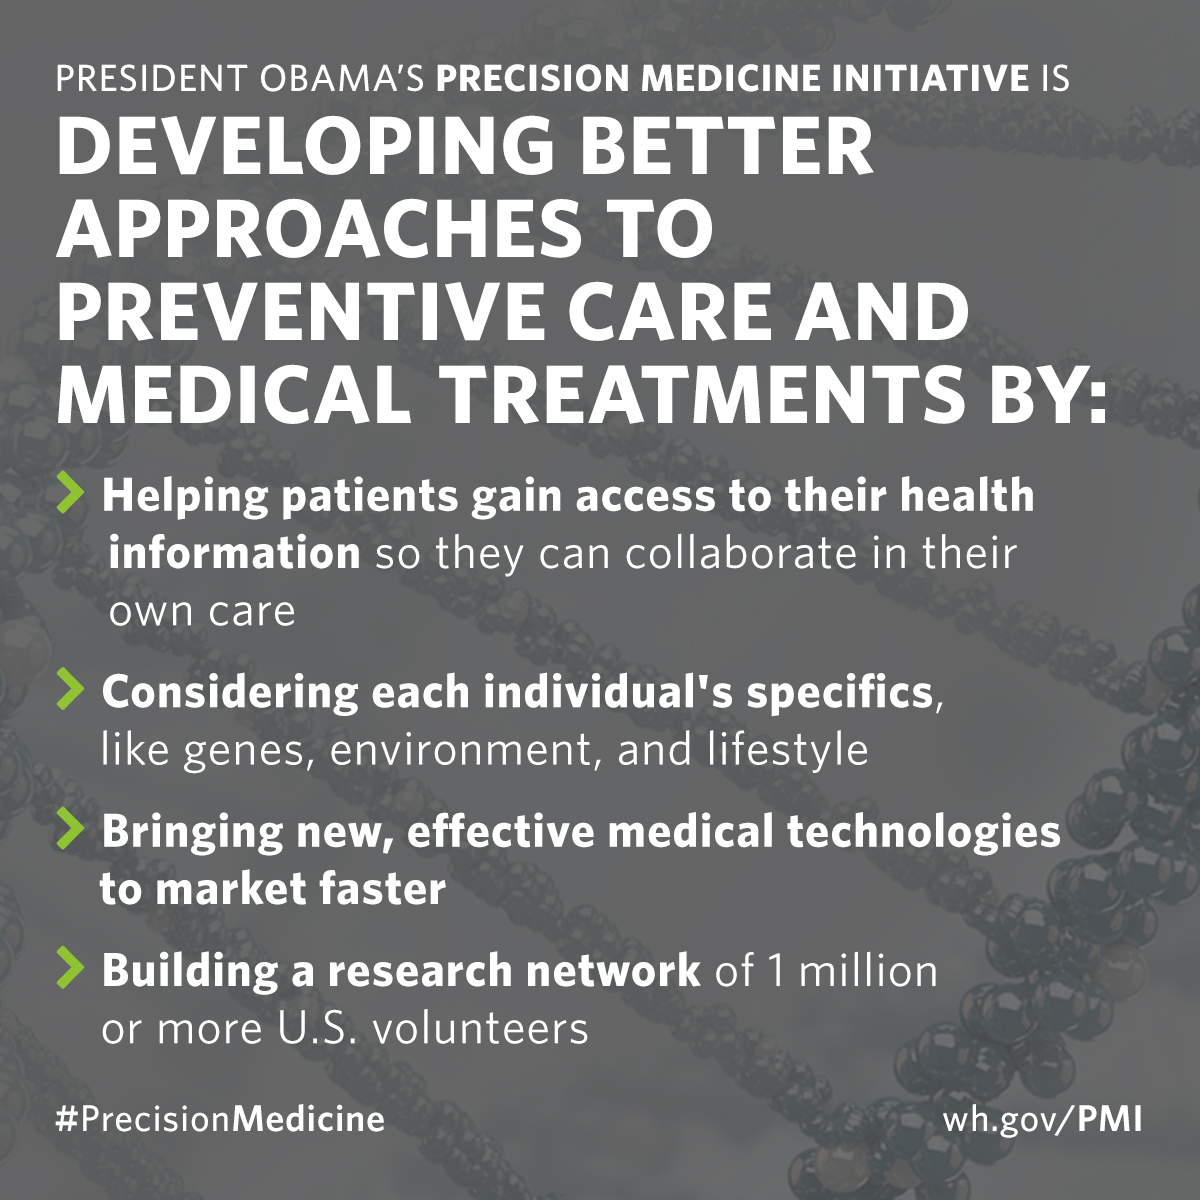 Precision medicine is developing better approaches to preventive care and medical treatments